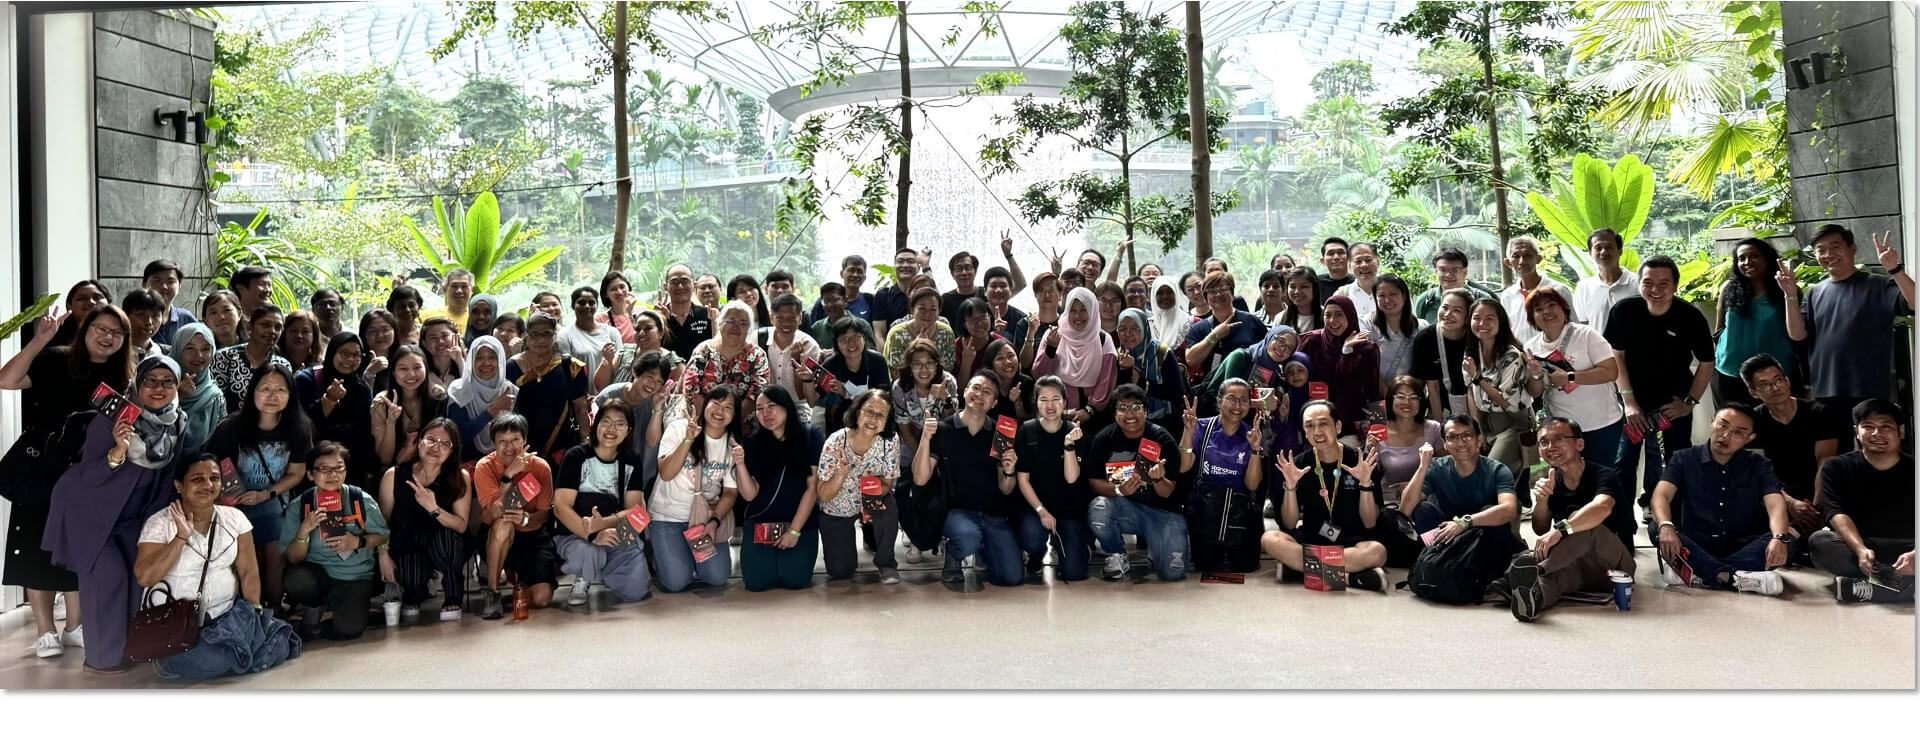 Staff of Yio Chu Kang Secondary School were at Changi Jewel for our annual Staff Retreat